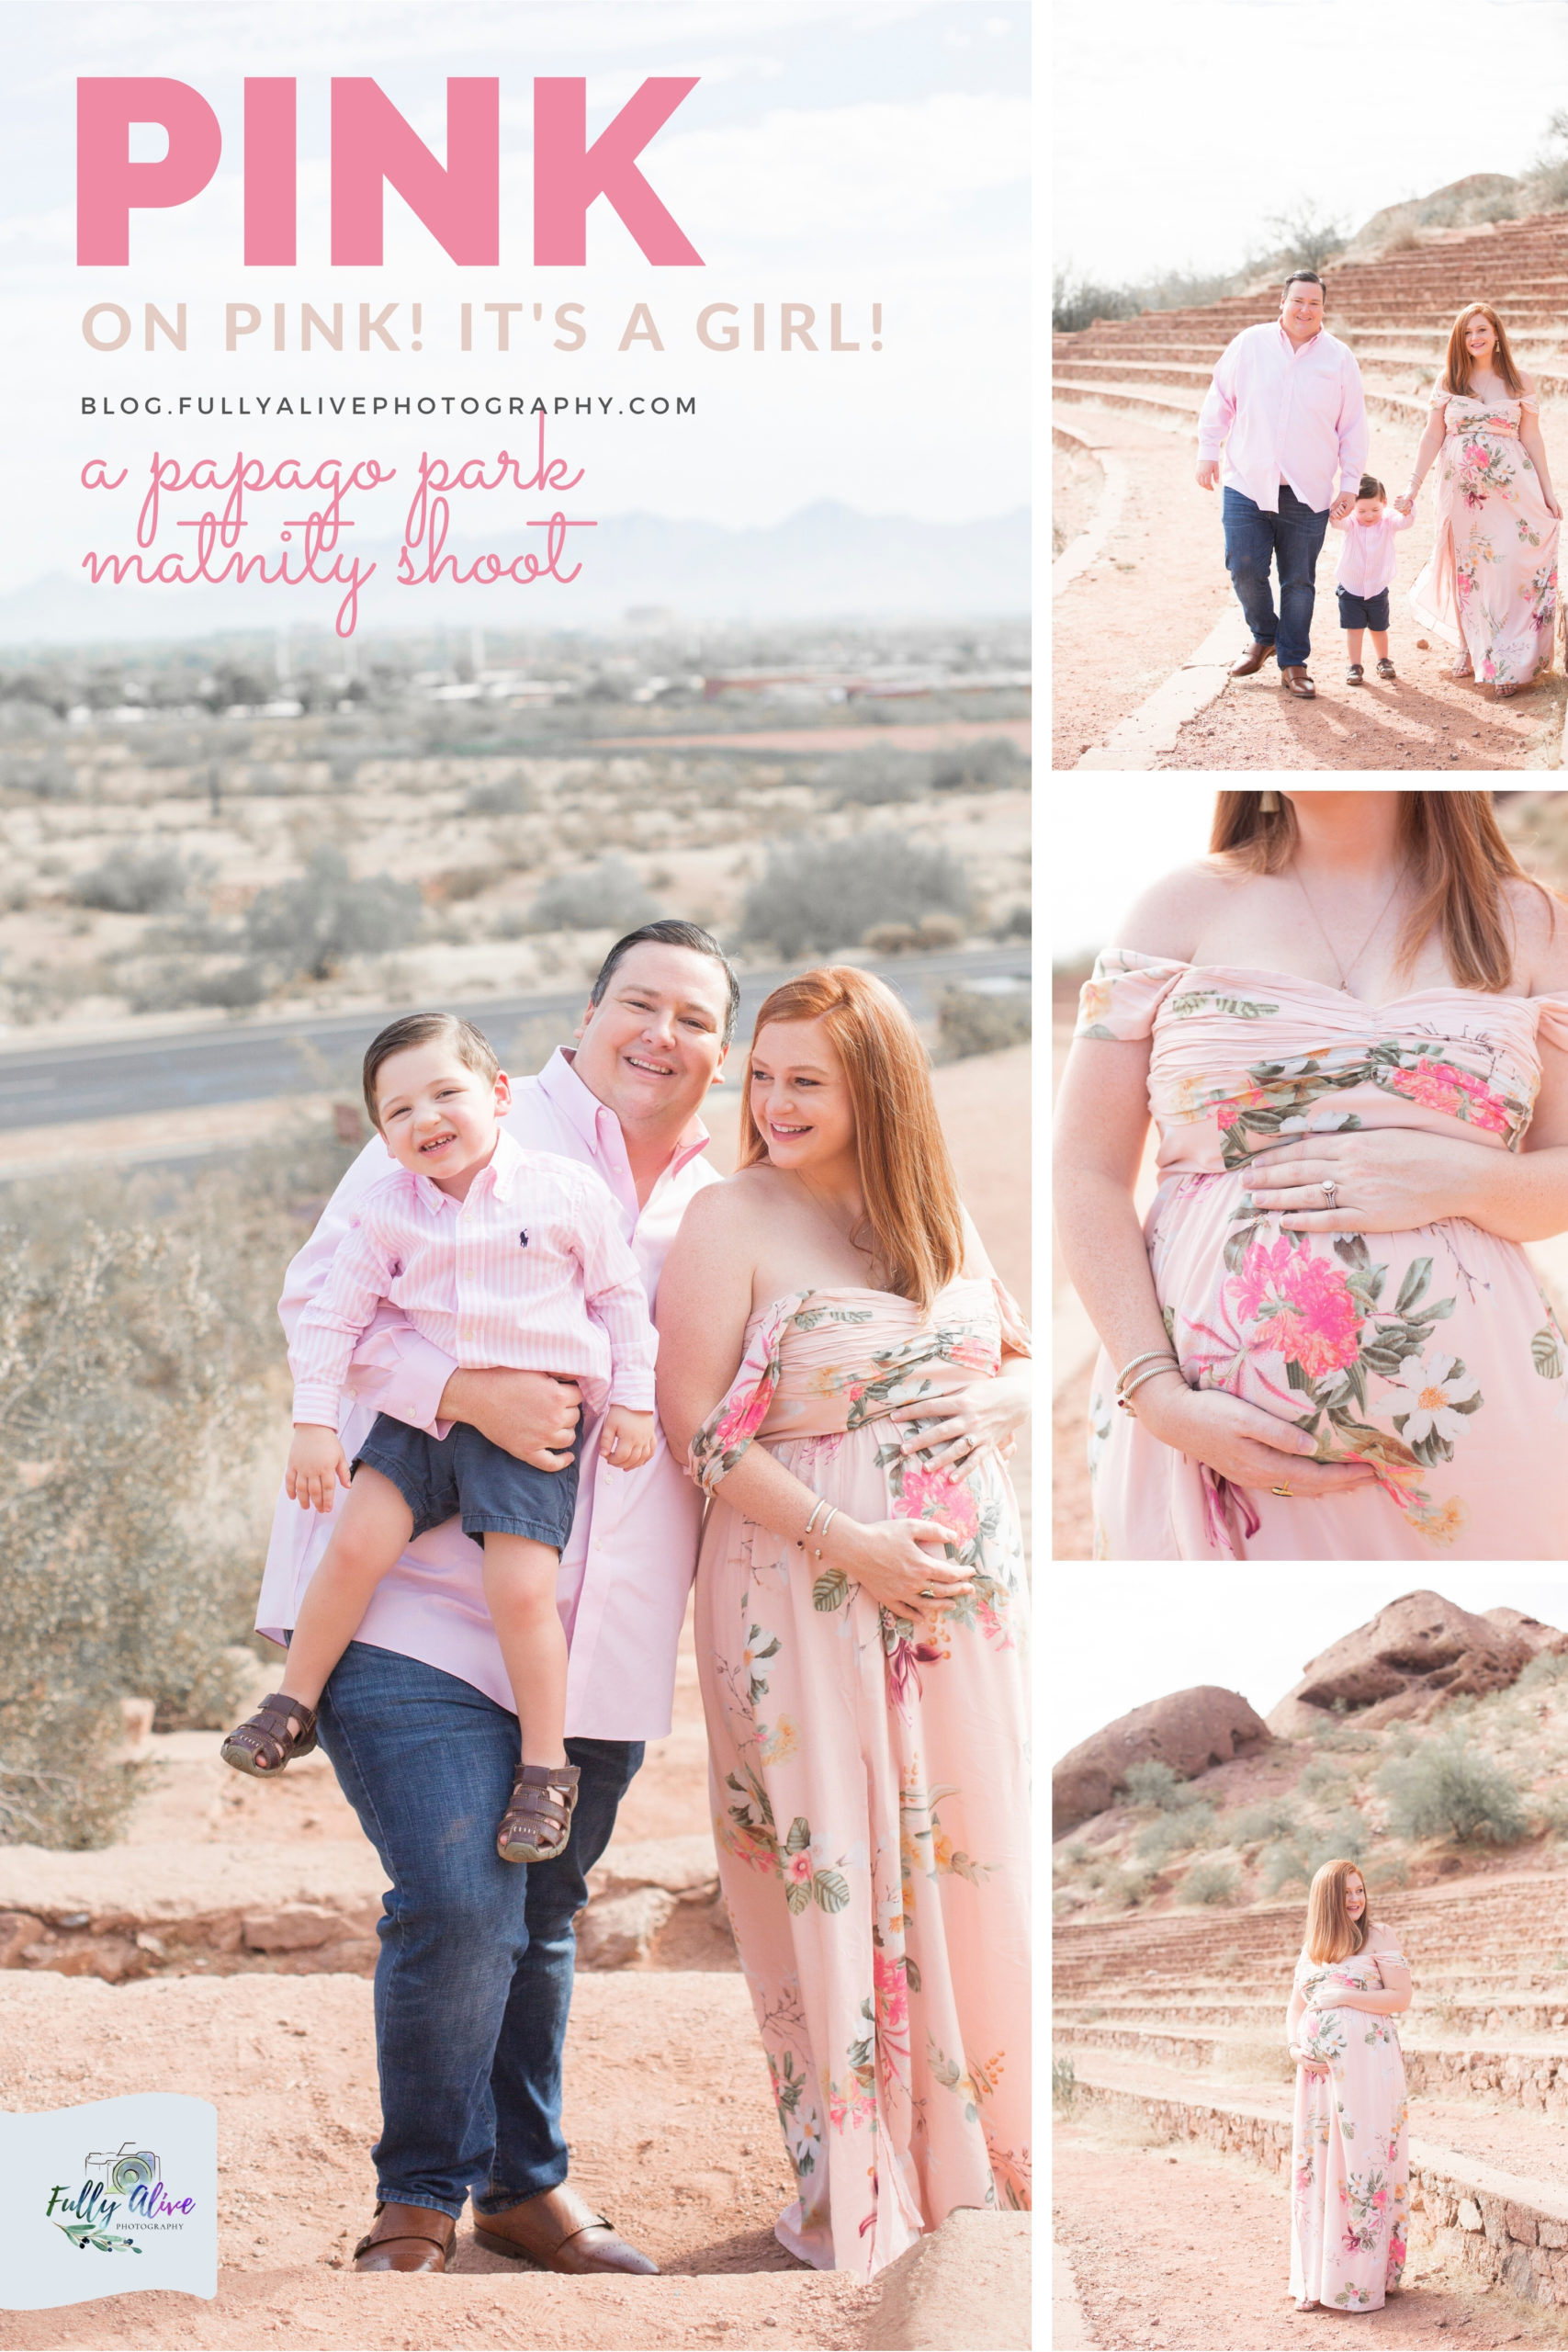 Pink On Pink! Itâ€™s A Girl! A Papago Park Maternity Shoot